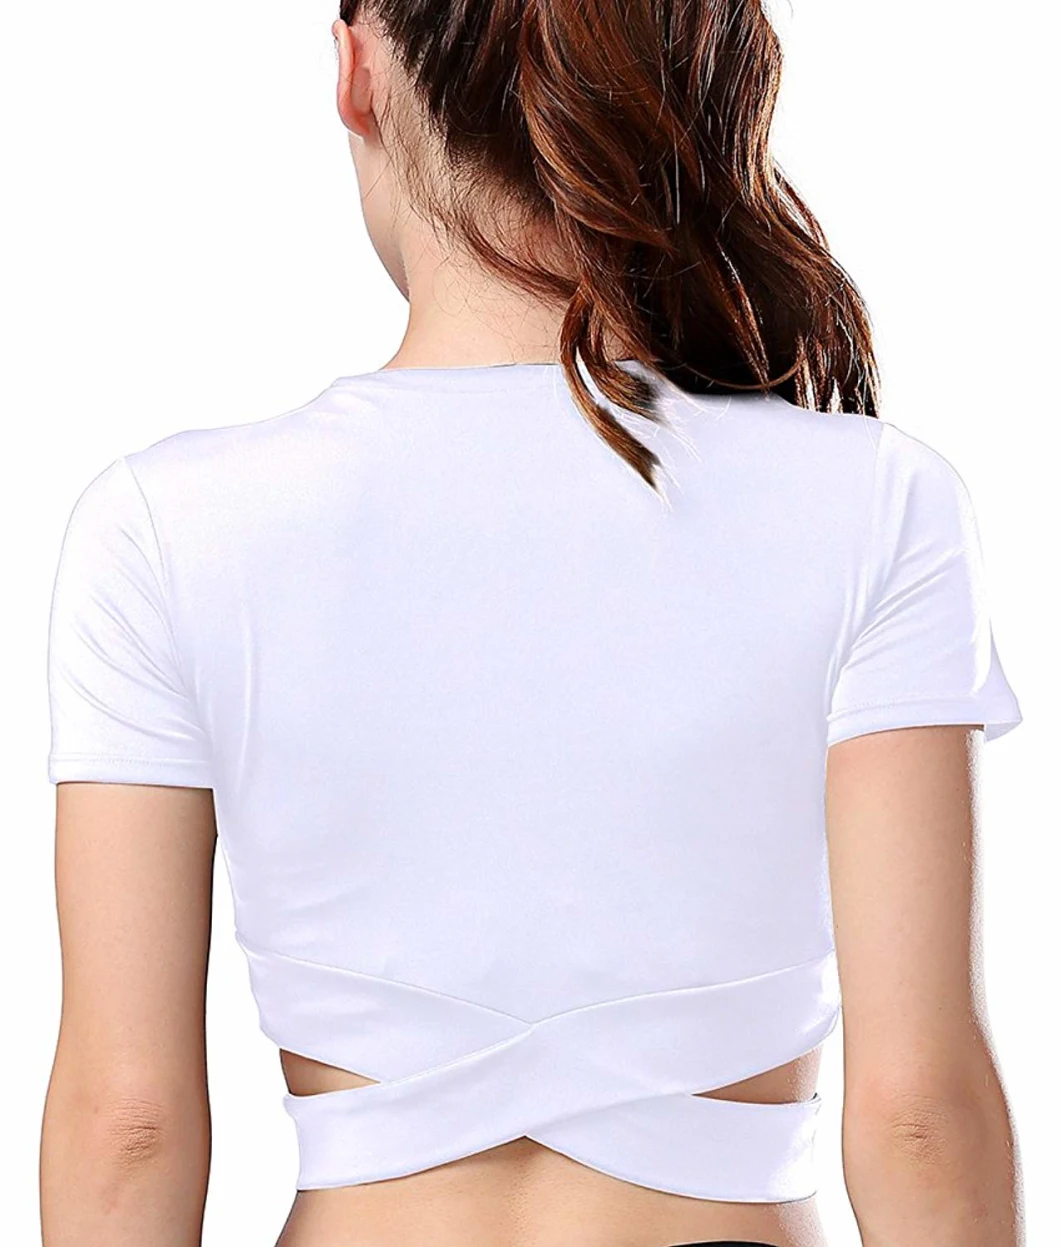 Fitness Ladies Gym Wear Clothing Women's Crop Top Compression Workout Athletic Short Sleeve Shirt